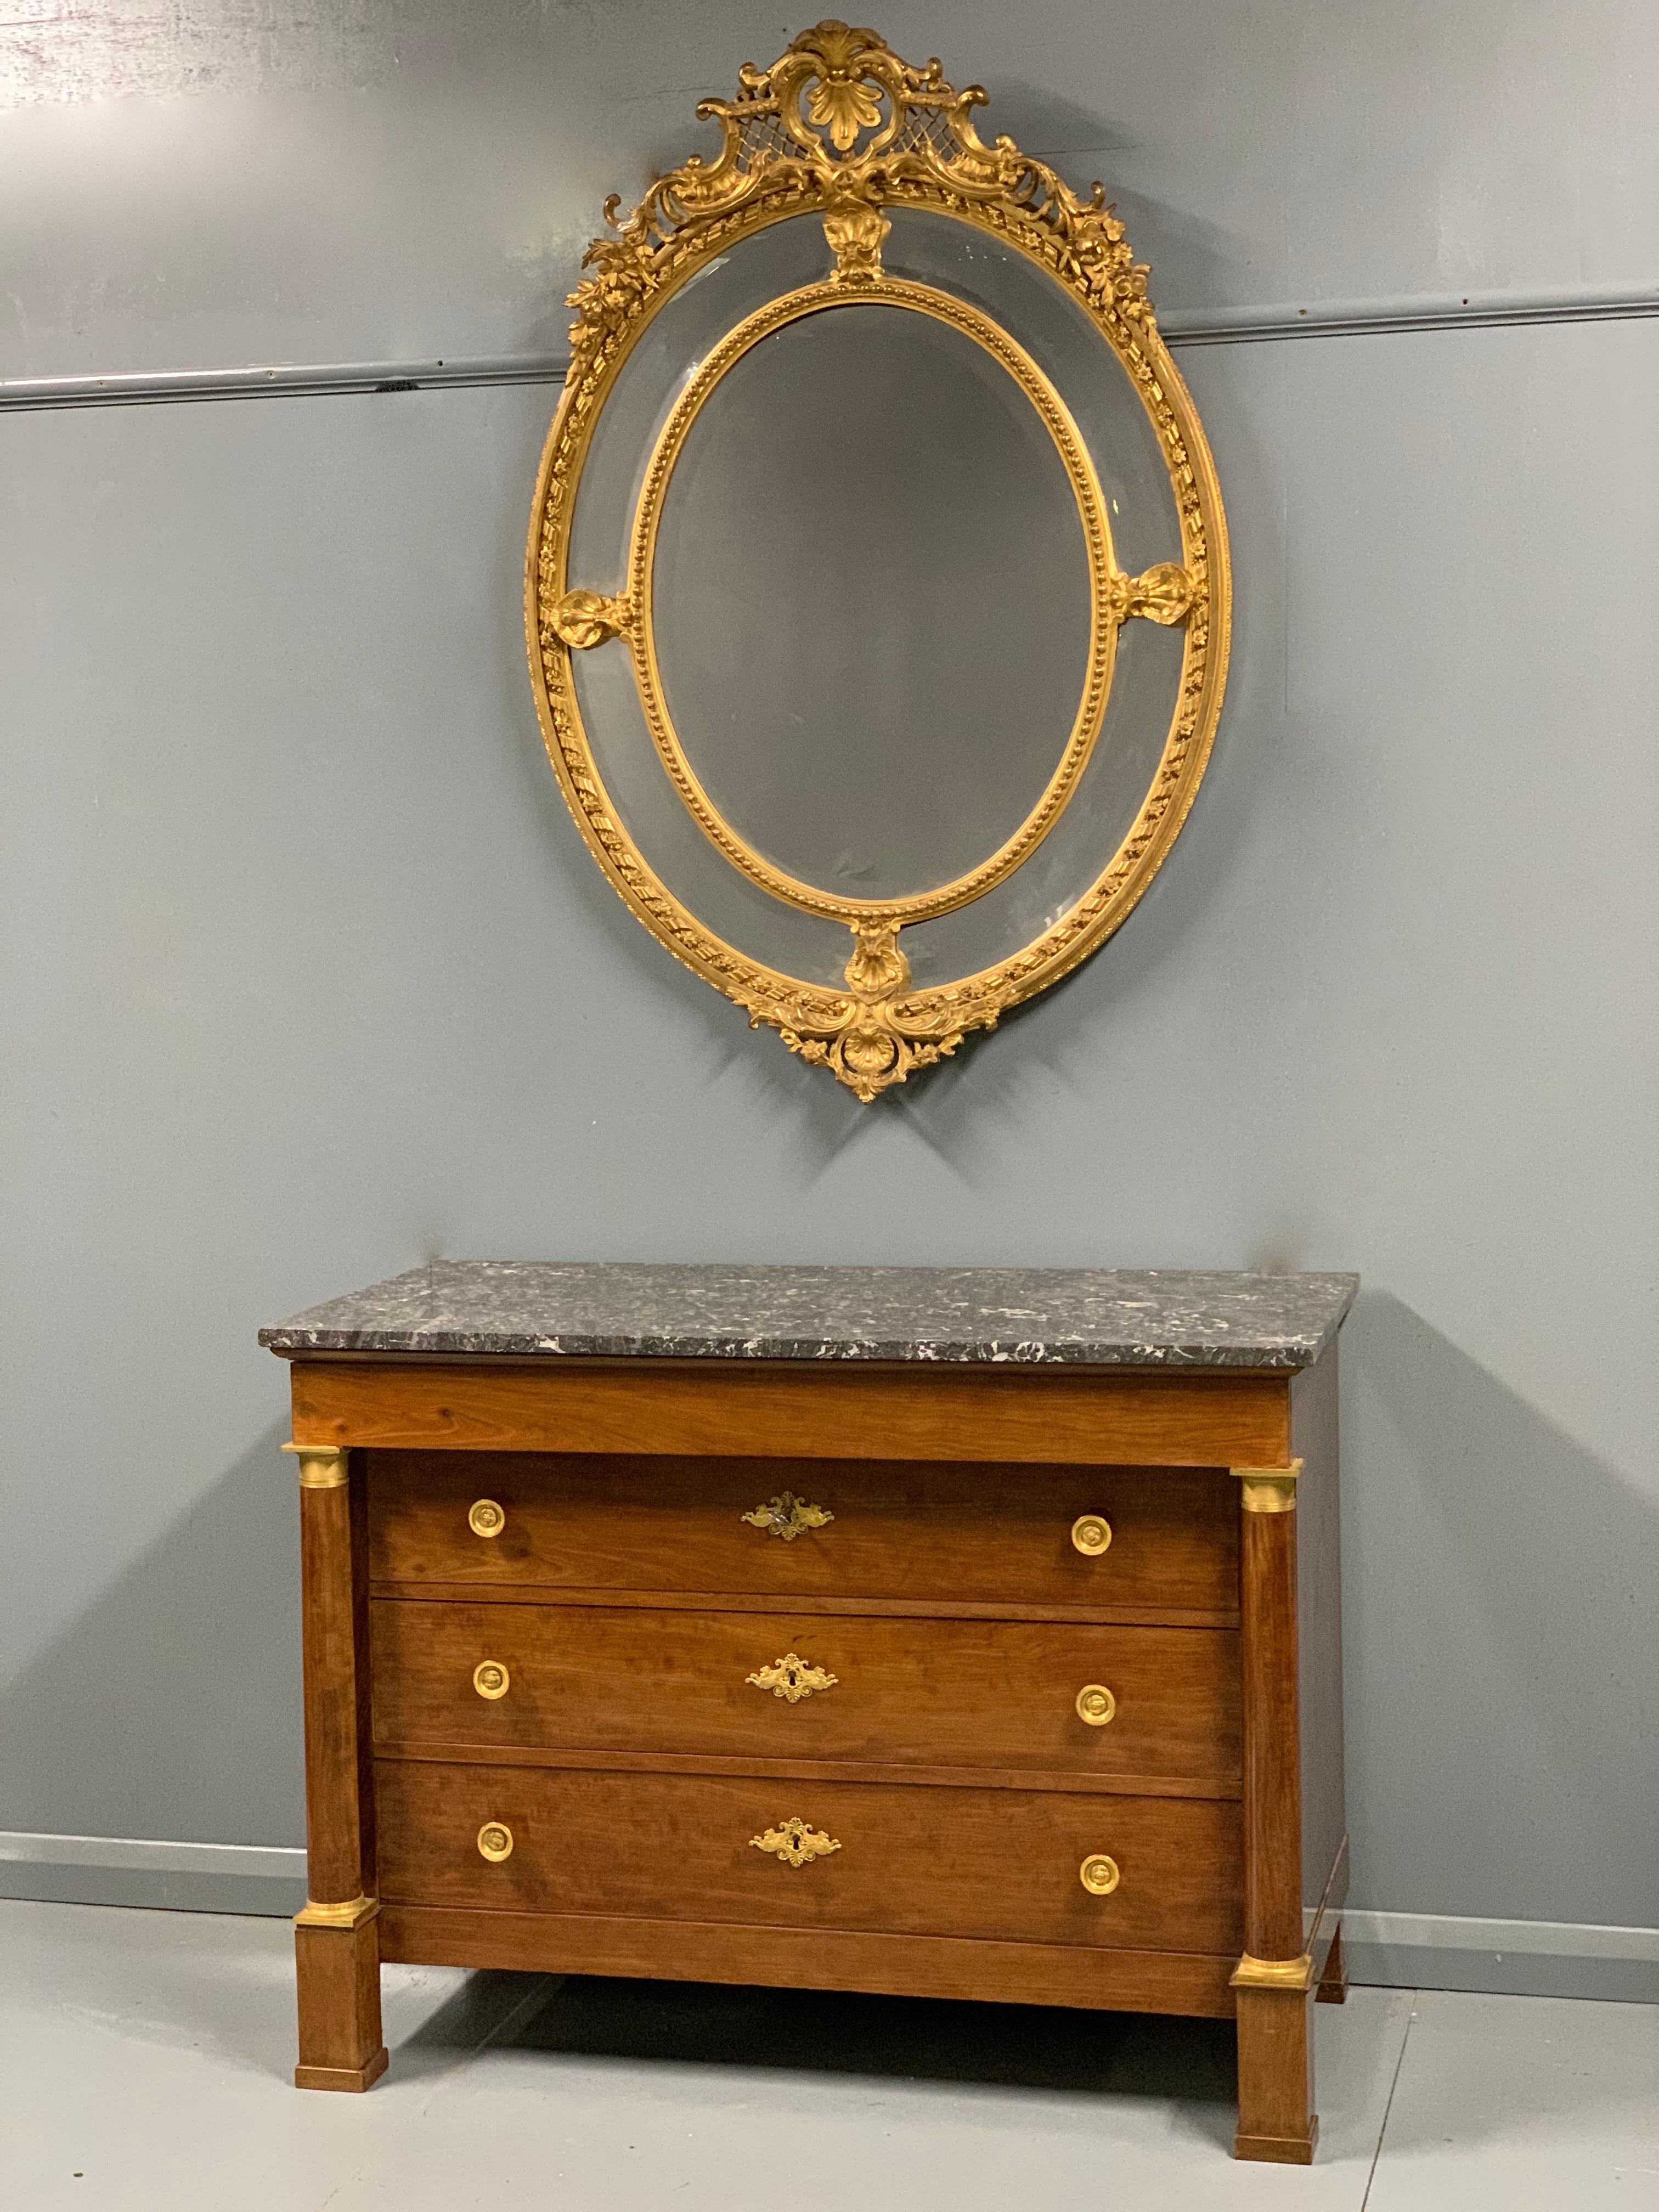 Really super quality and condition early 19th century French mahogany Empire commode with original brass mounts, handles and charcoal grey and white marble top.
This is a substantial piece of furniture and has been able to grow old in great comfort